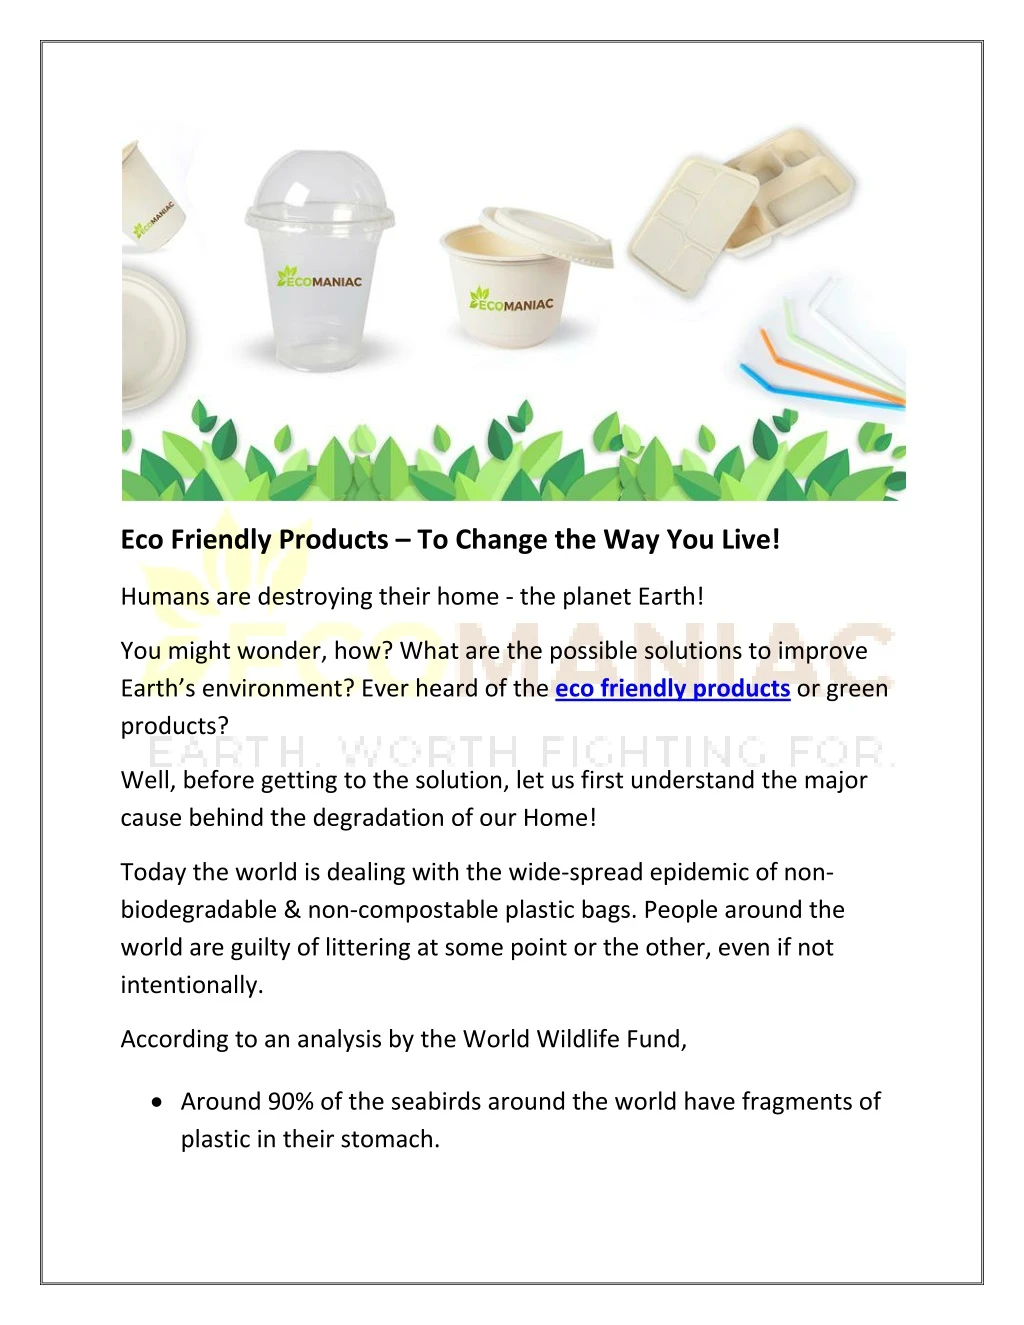 eco friendly products to change the way you live